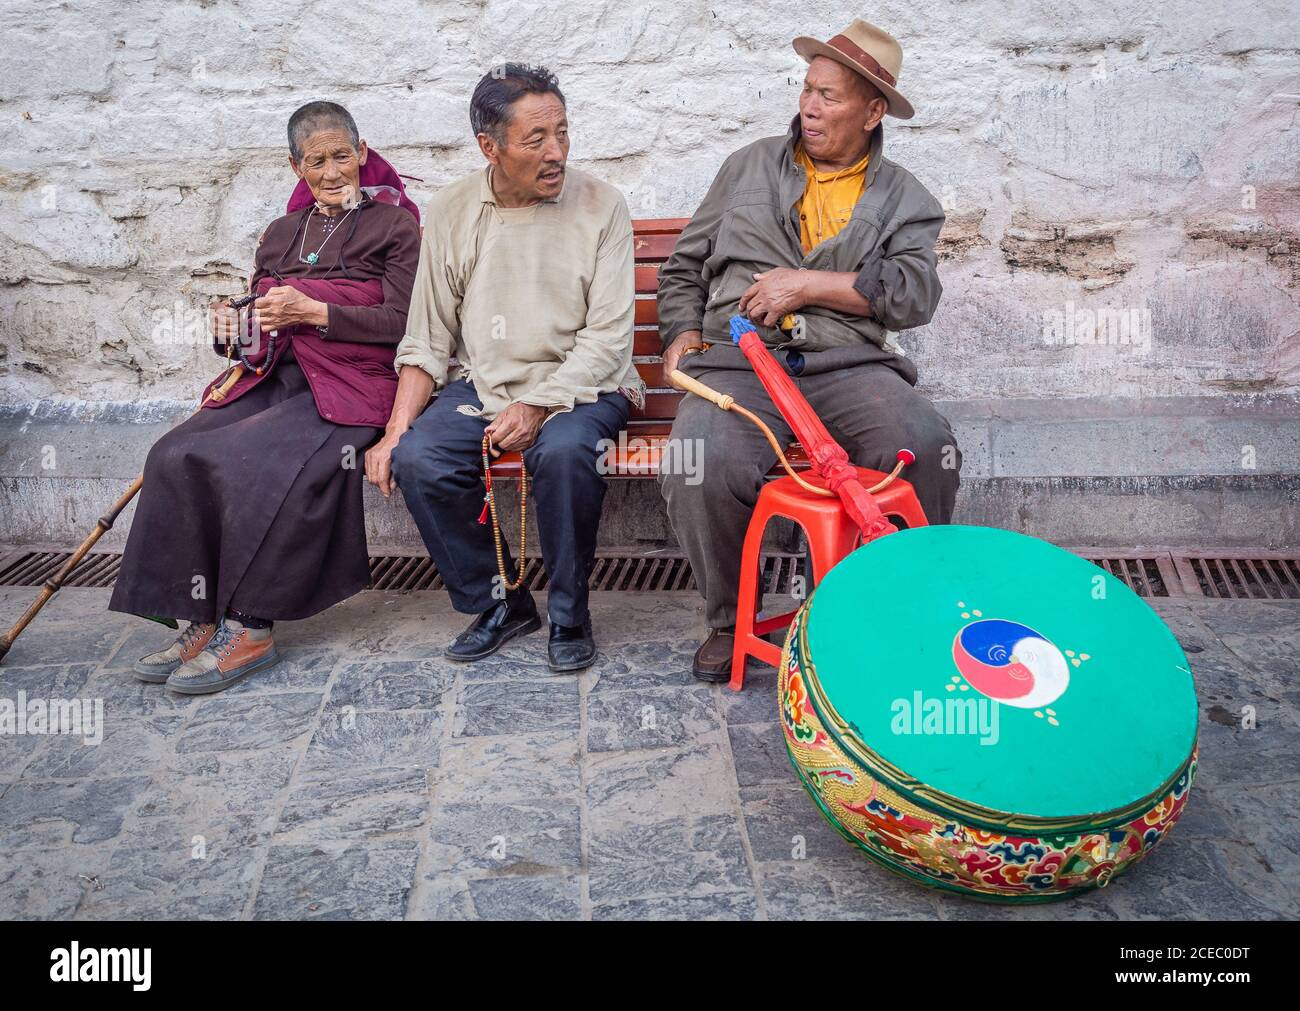 Tibet - August, 29 2014: Ethnic man and woman with beads looking at male with musical instrument while sitting on bench on town street Stock Photo